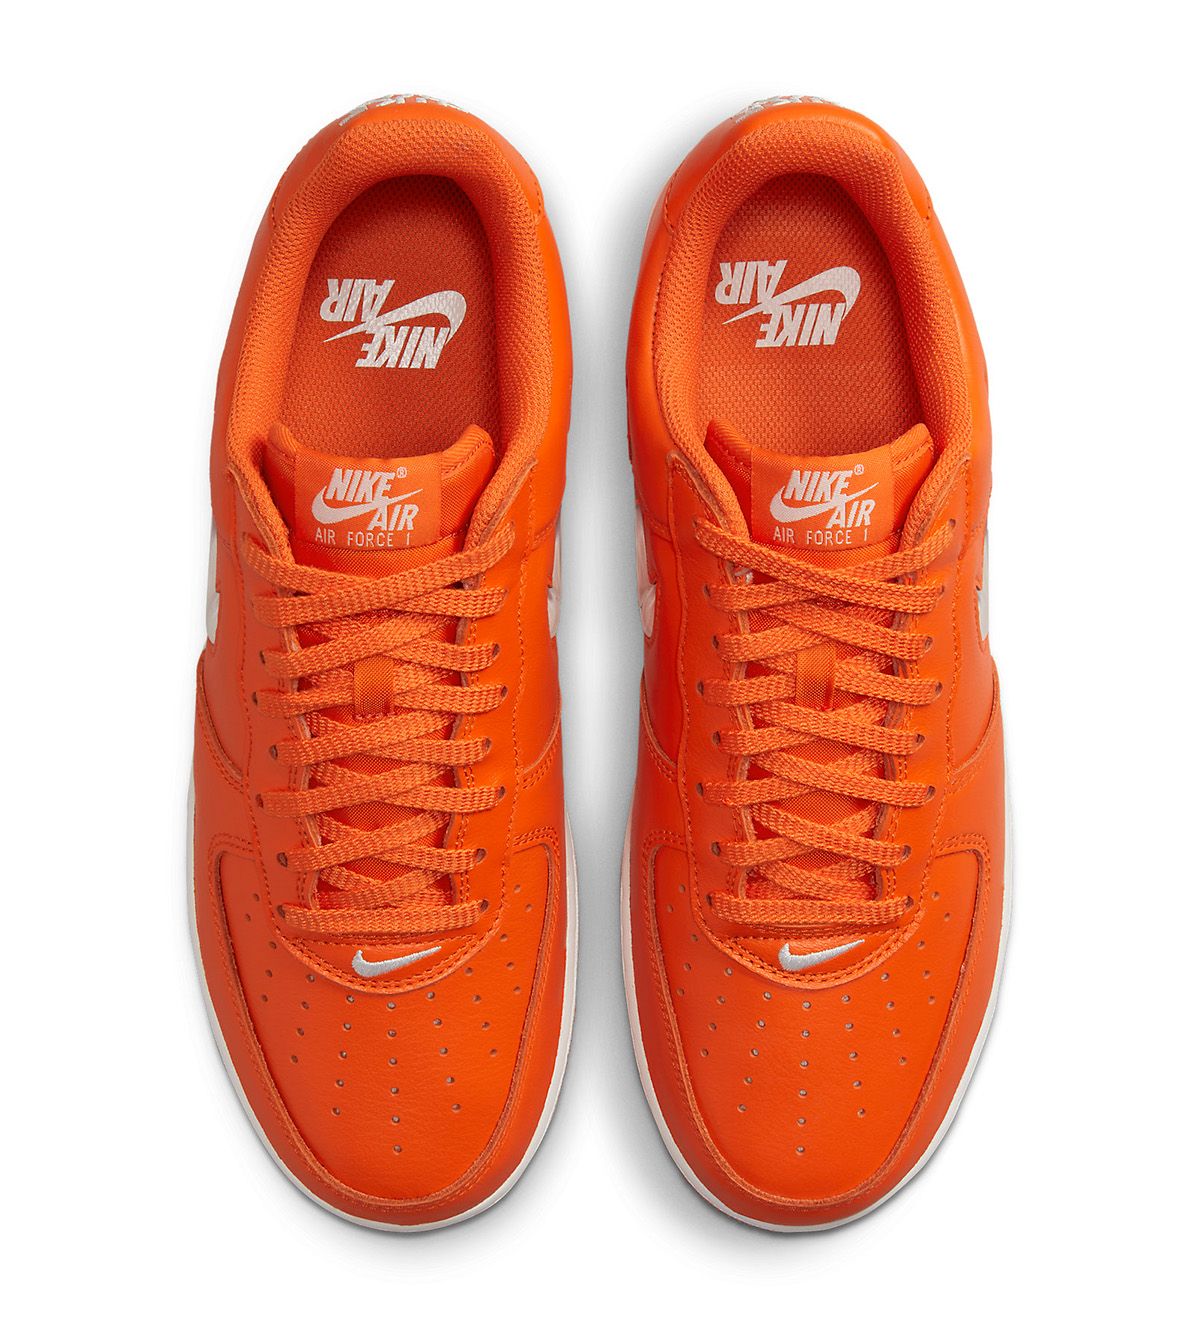 First Looks // Nike Air Force 1 Low “Orange Jewel” | House of Heat°